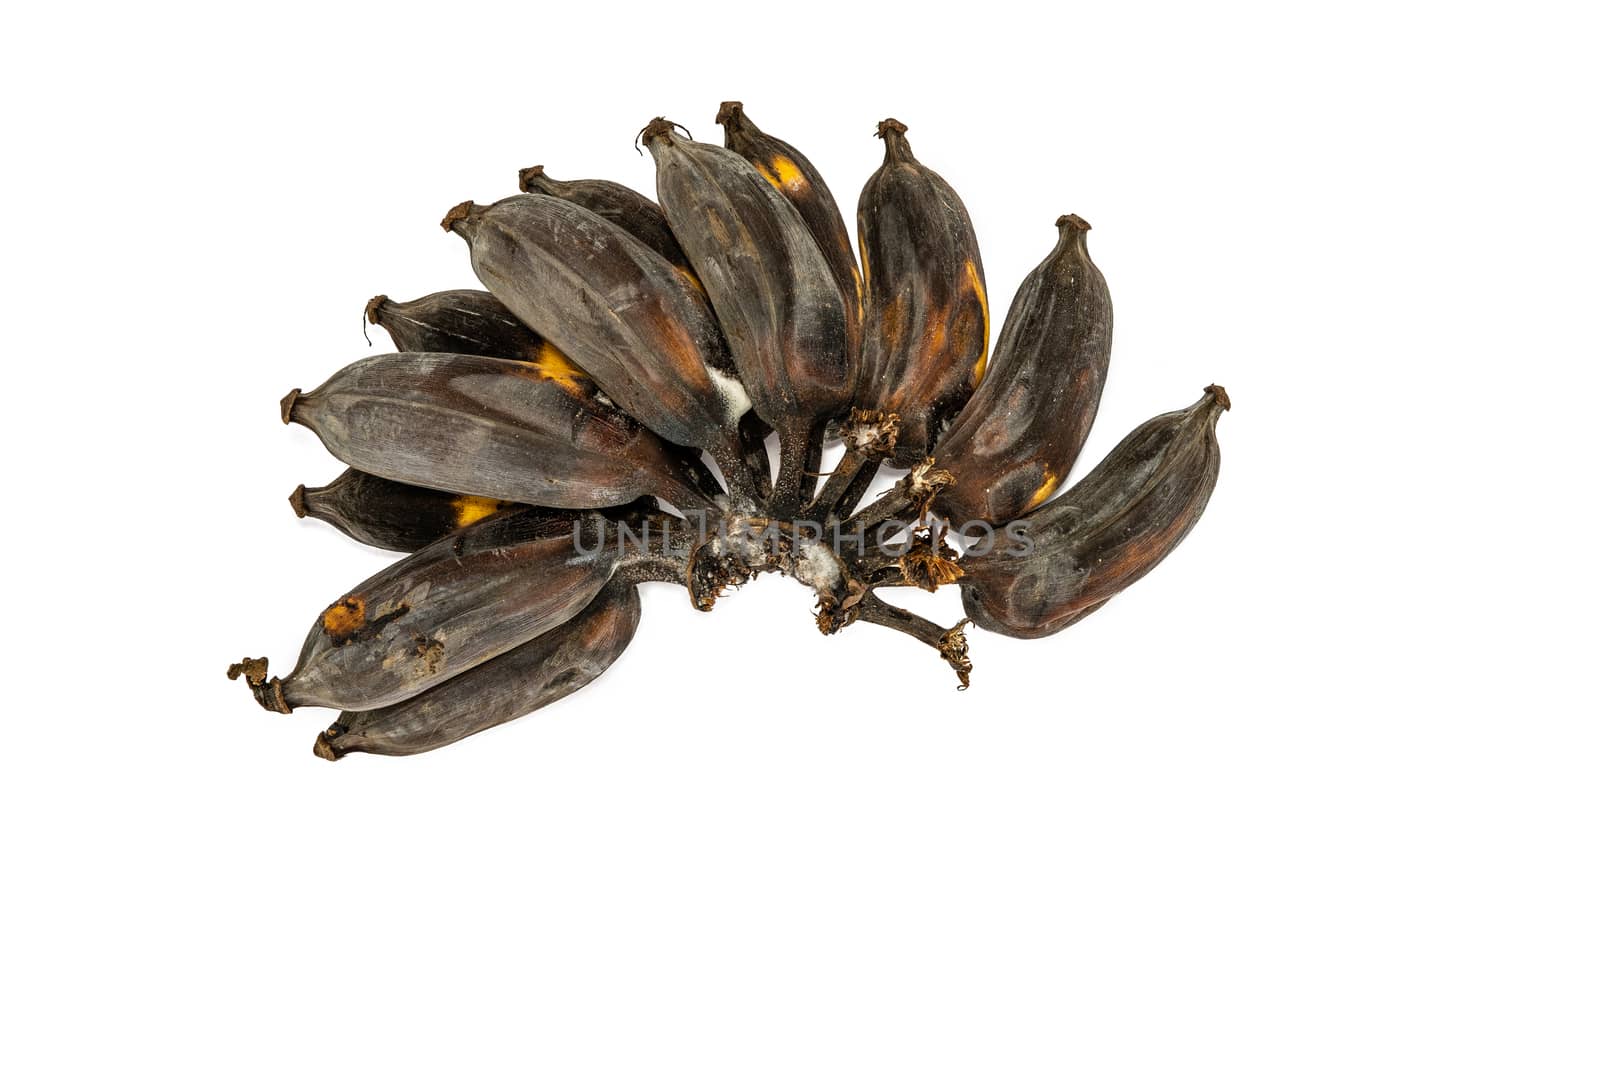 The Ripe bananas on a white background Yellow and black banana peel.